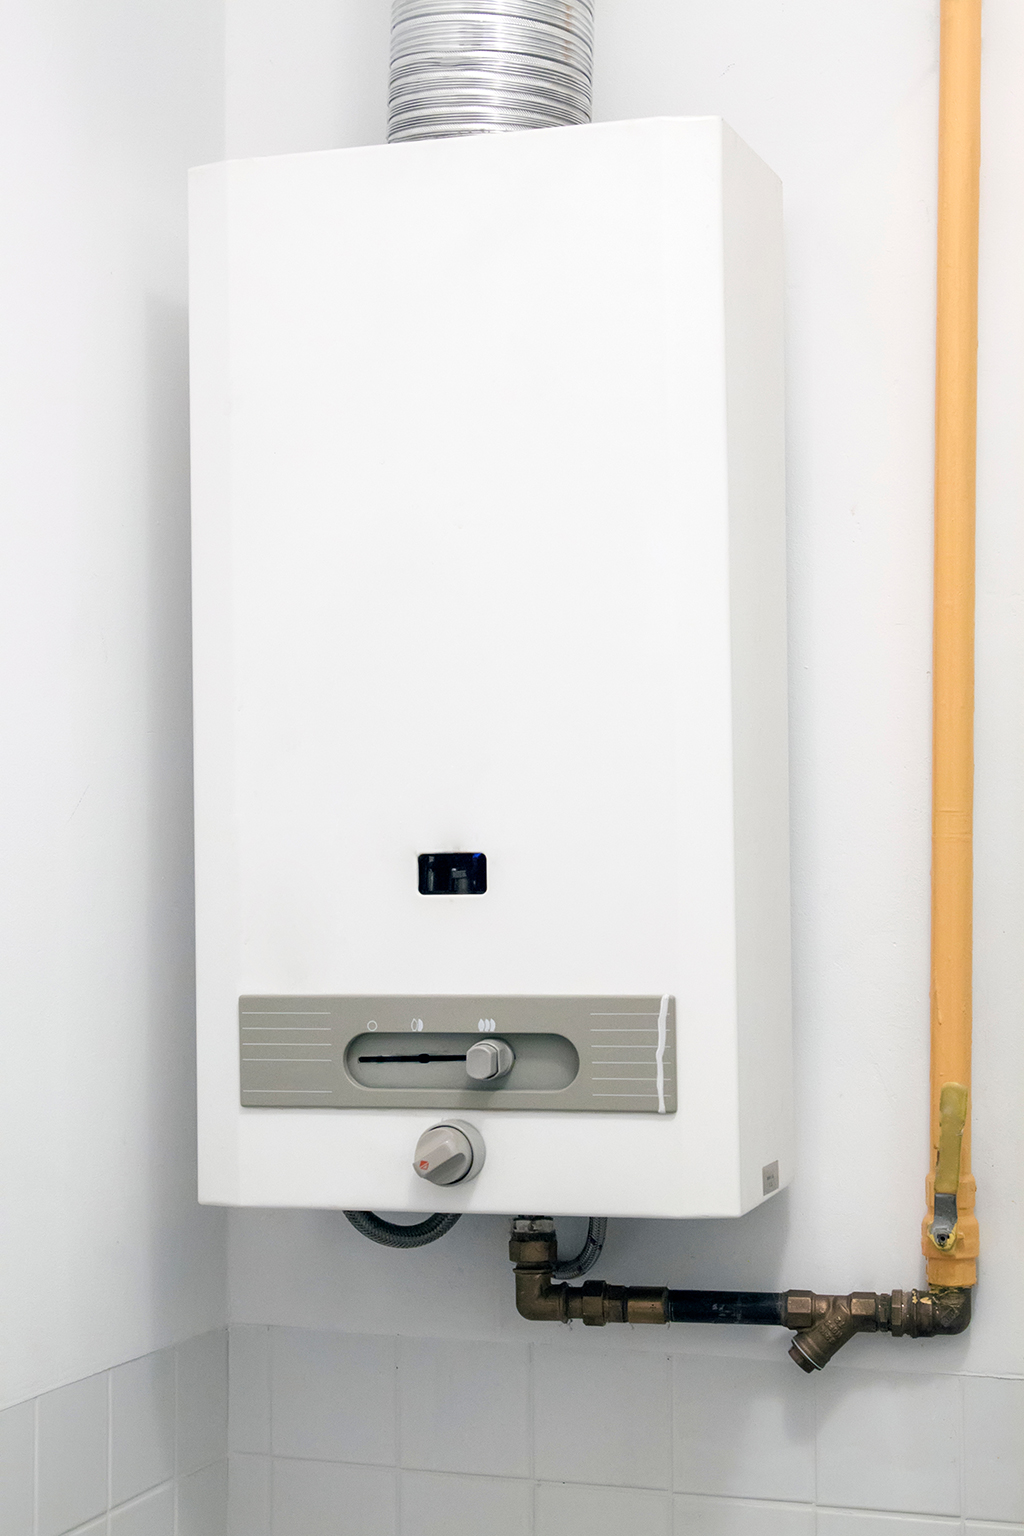 Tankless Water Heater Repair: What’s Inside A Typical Tankless Unit? | Richardson, TX